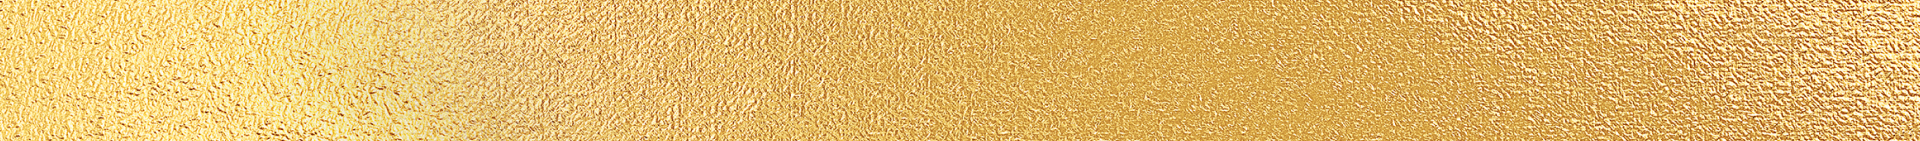 gold rough background